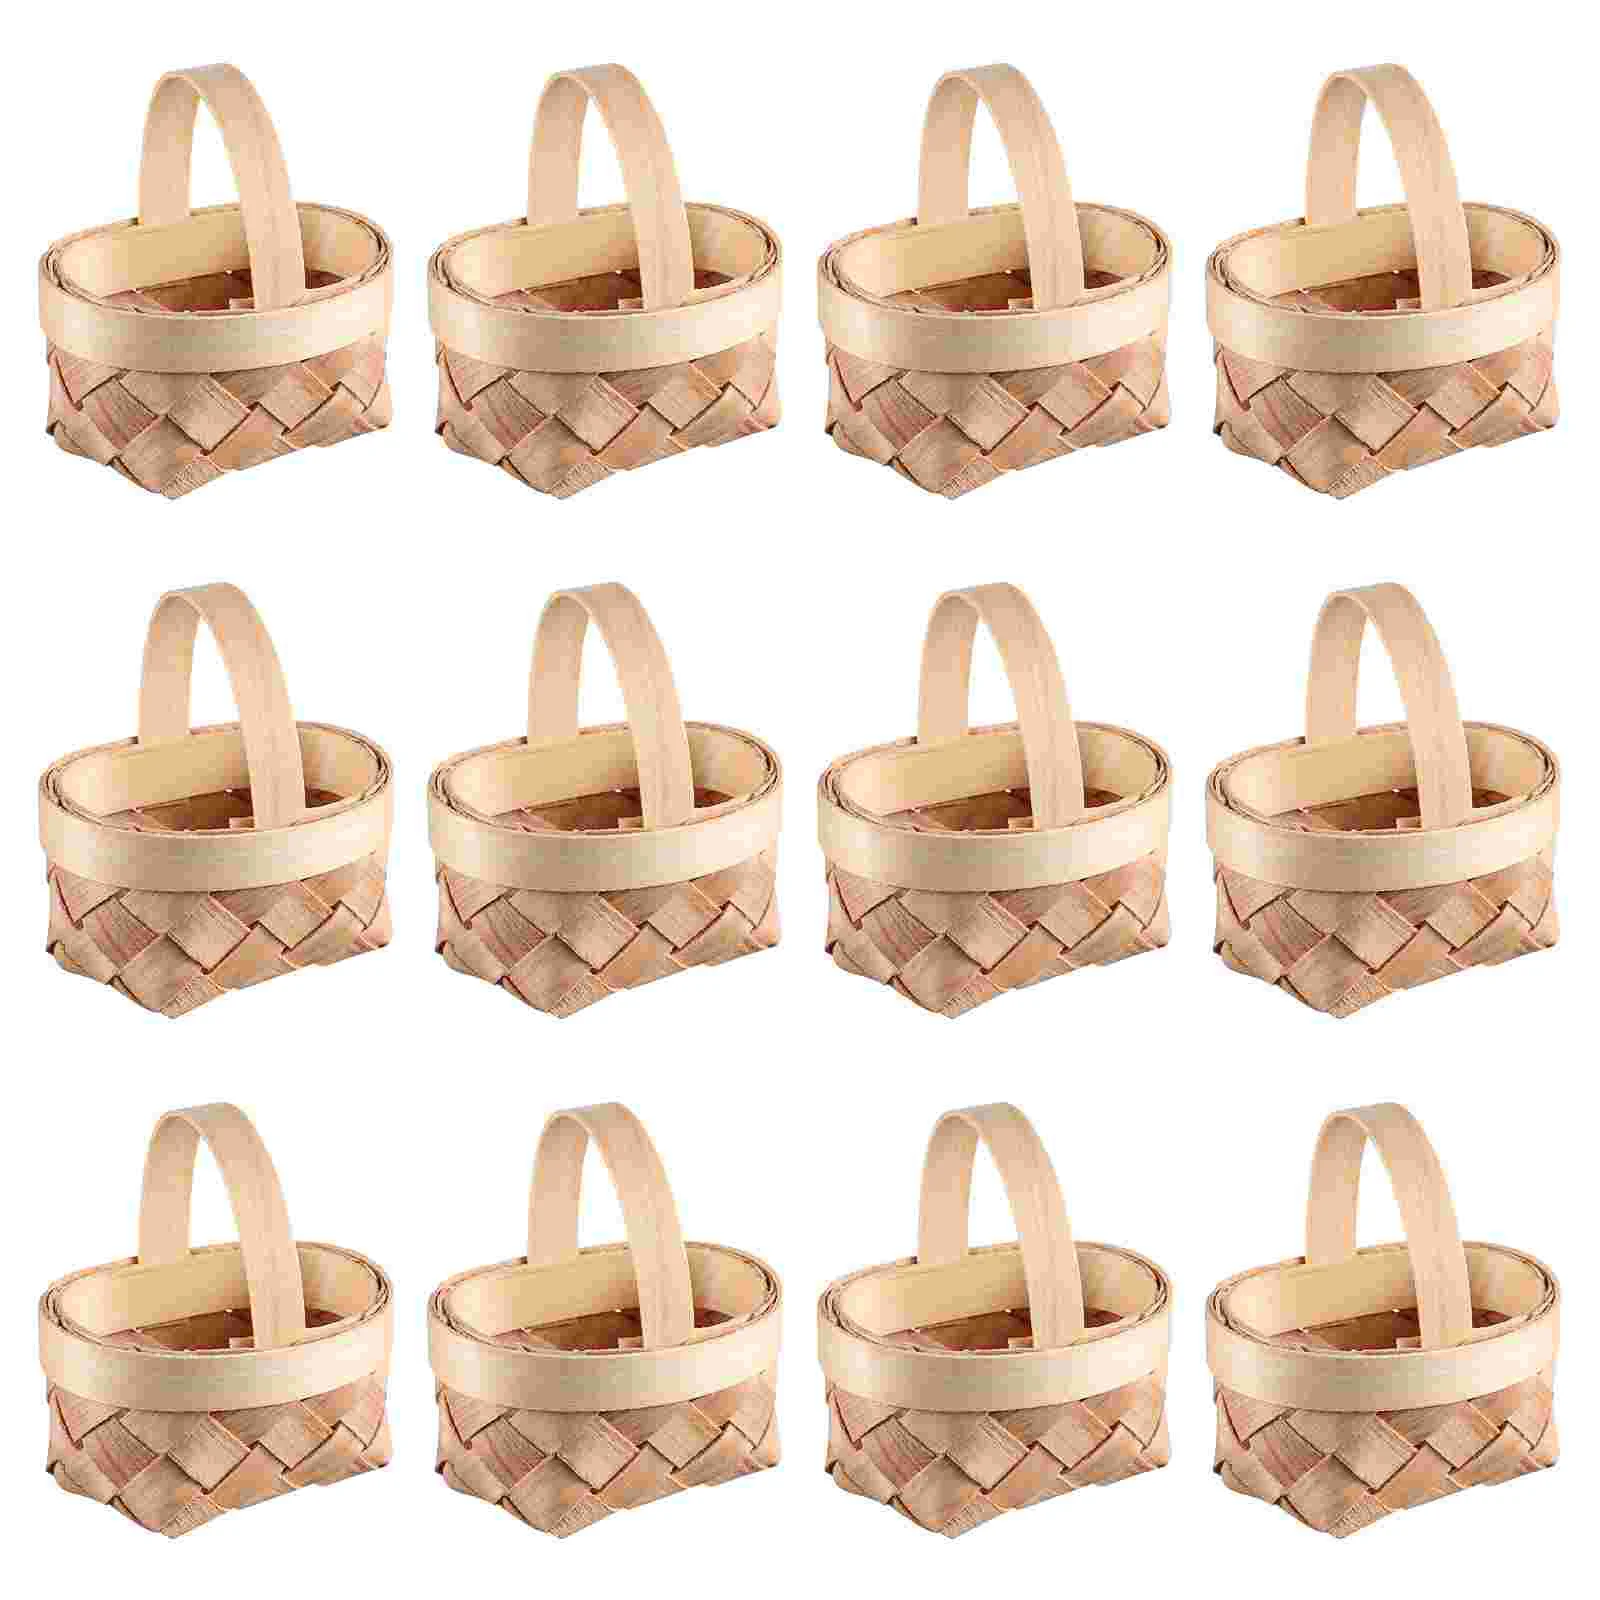 

Basket Mini Basketswoven Wicker Tiny Chip Easter Candy Gifts Craftshandle Casefavors Miniature Craft Favorwood Picnic Fruit